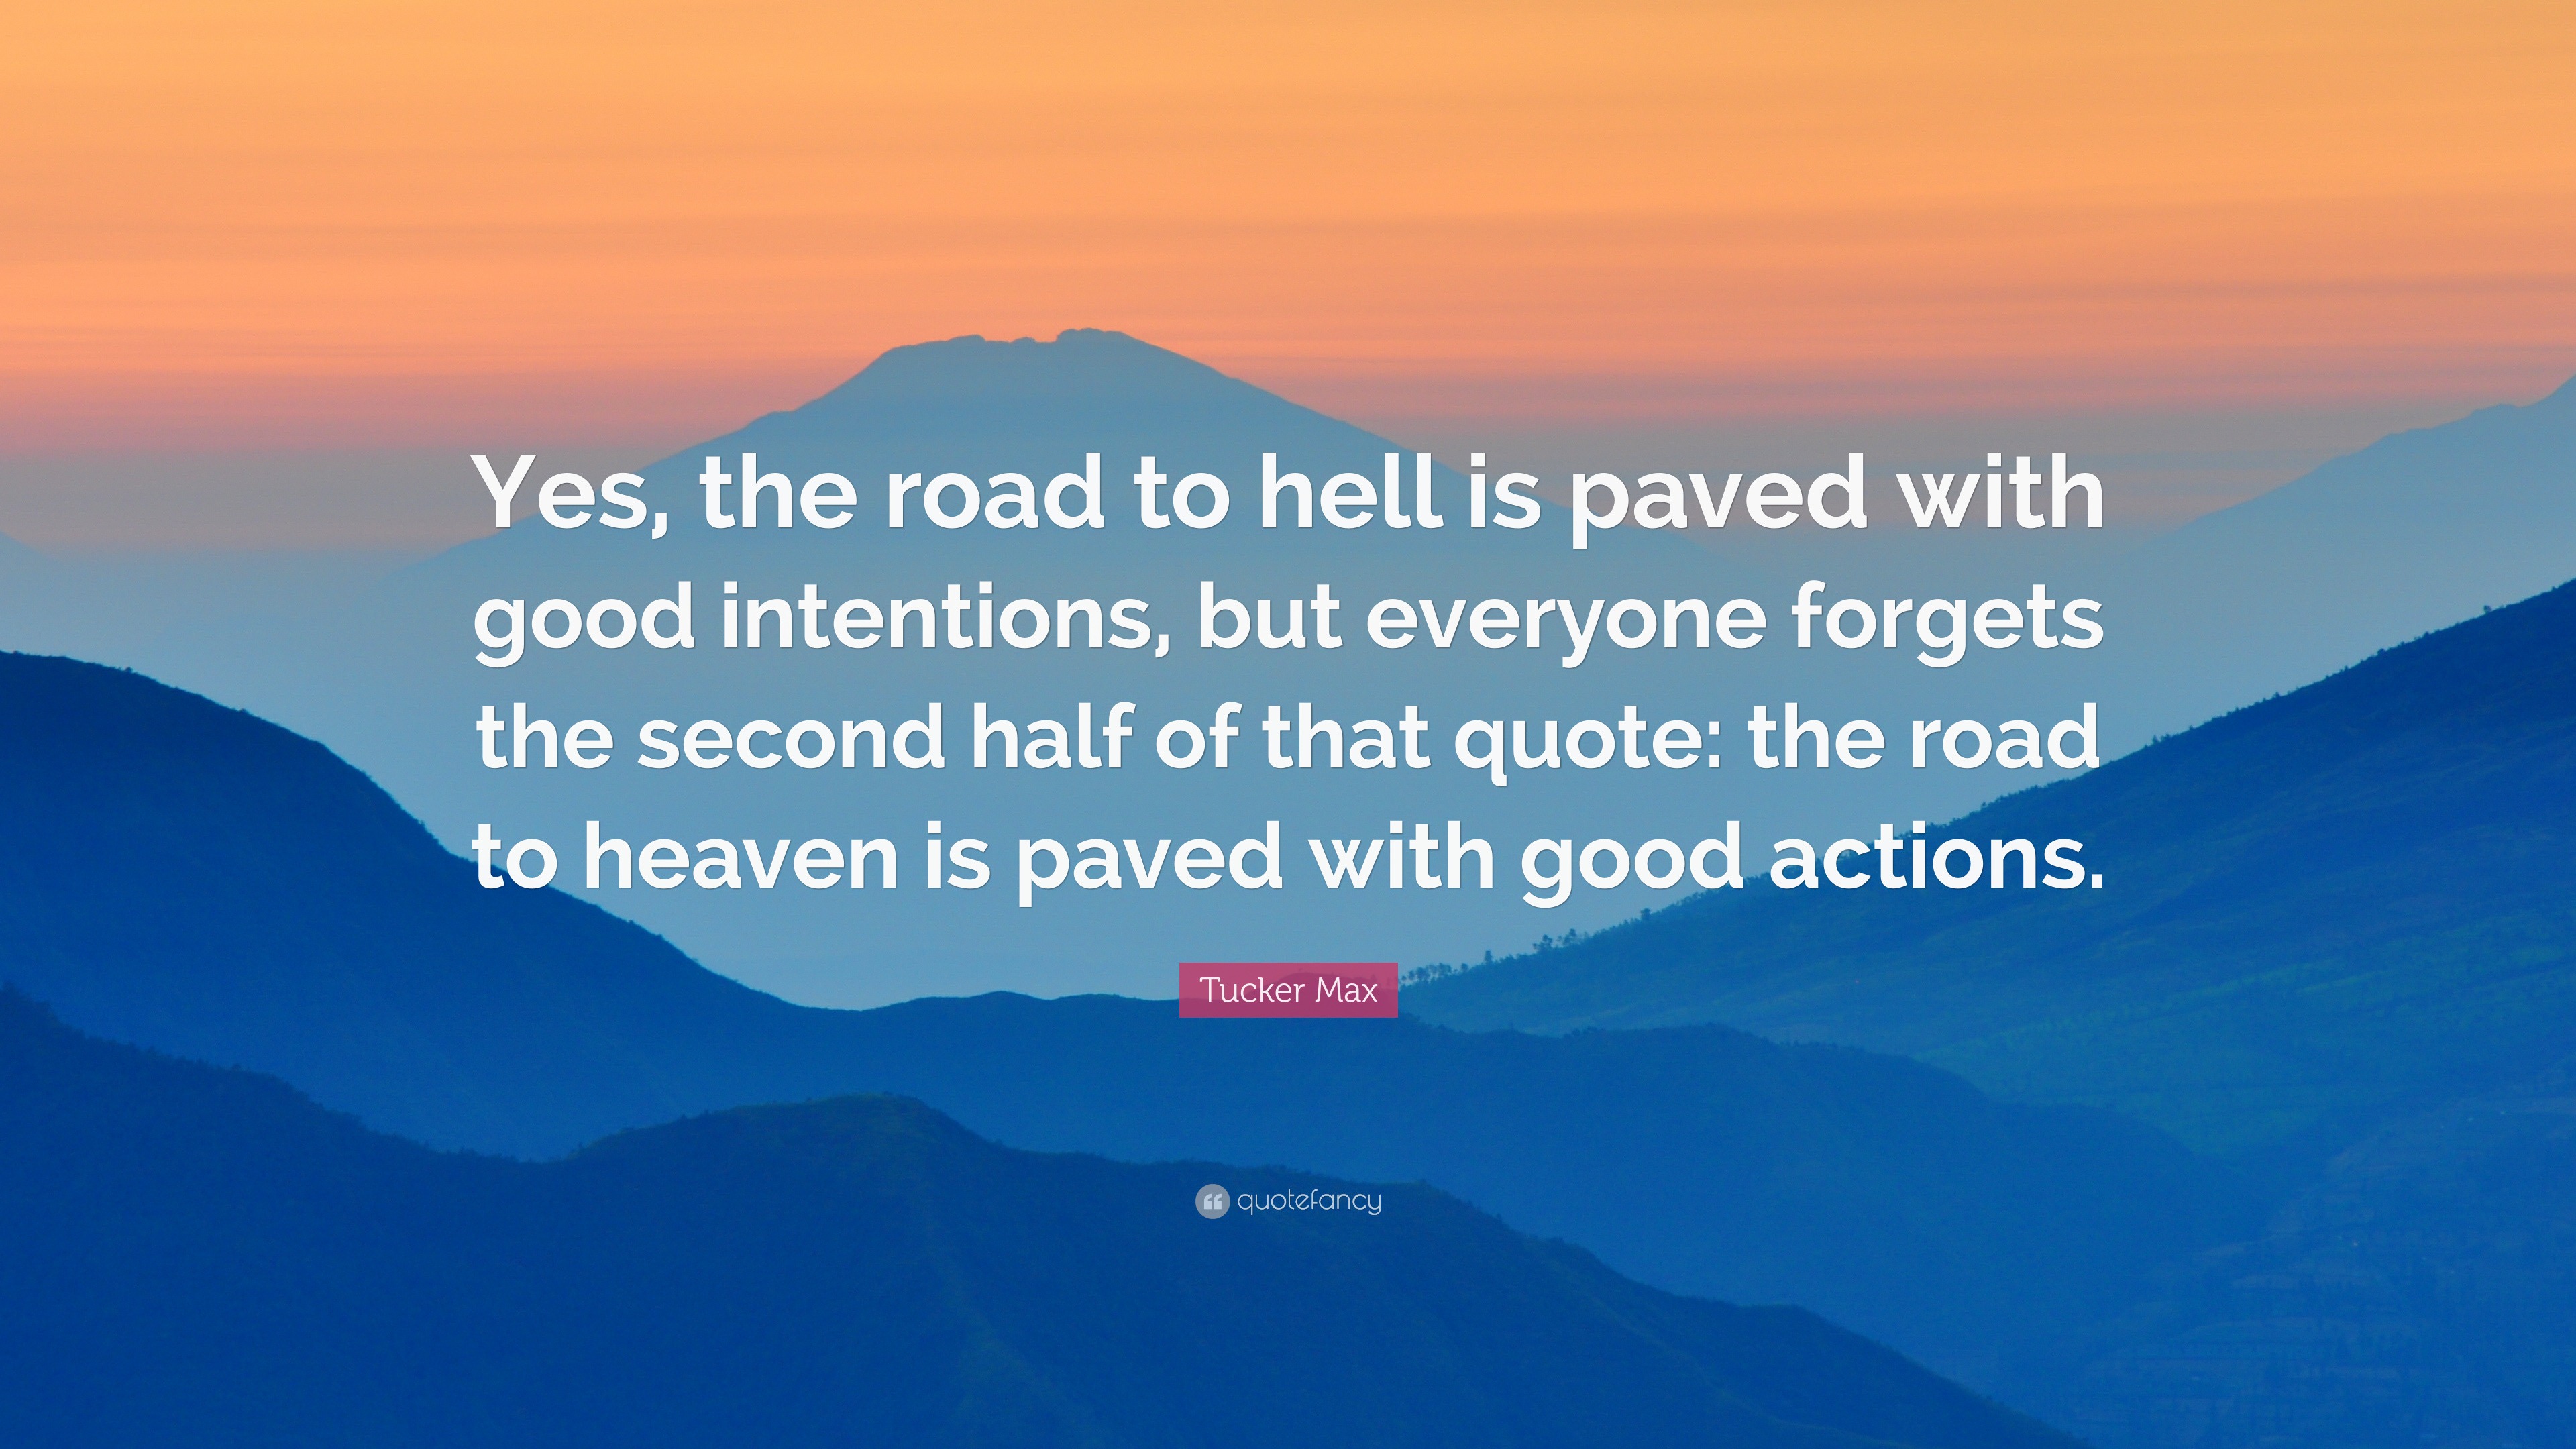 Tucker Max Quote: “Yes, the road to hell is paved with good intentions